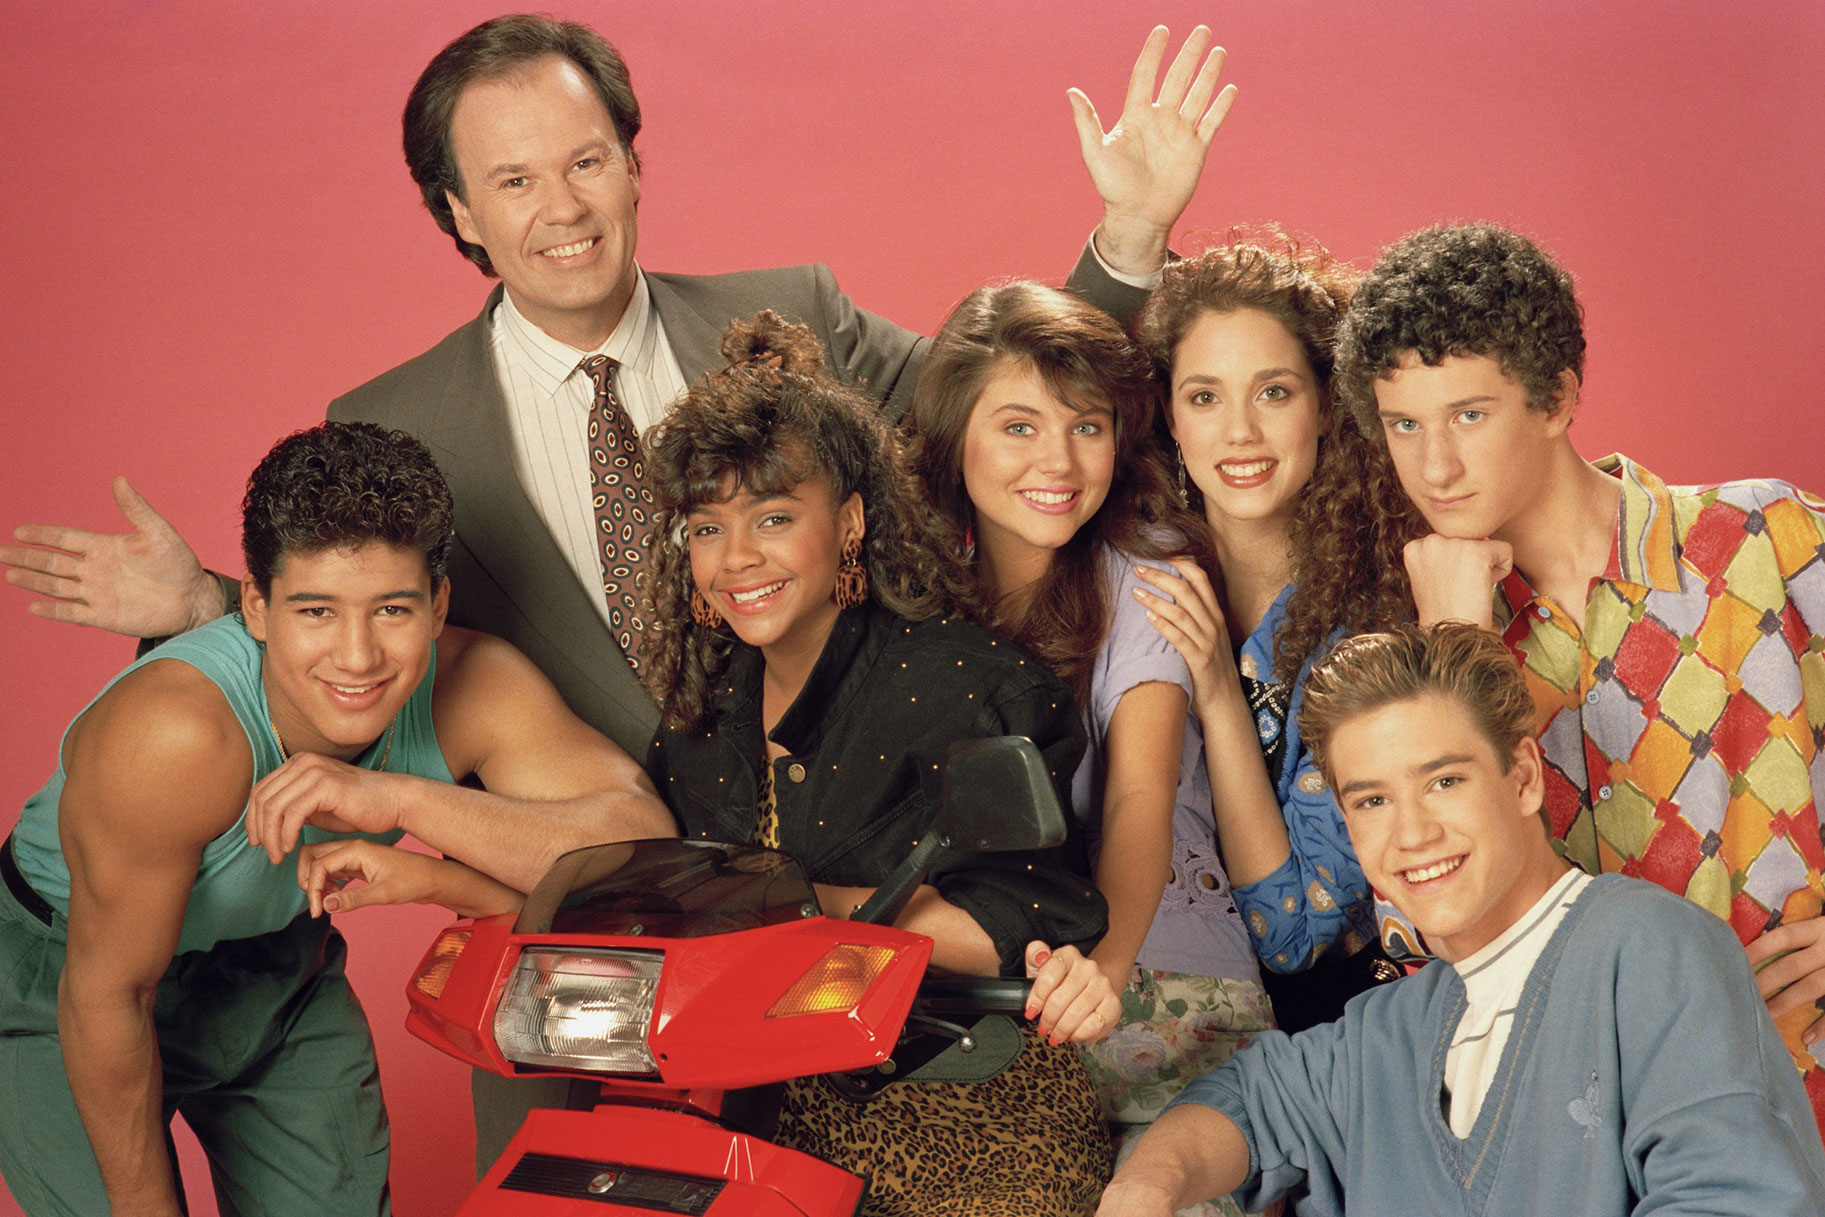 Saved By The Bell Original